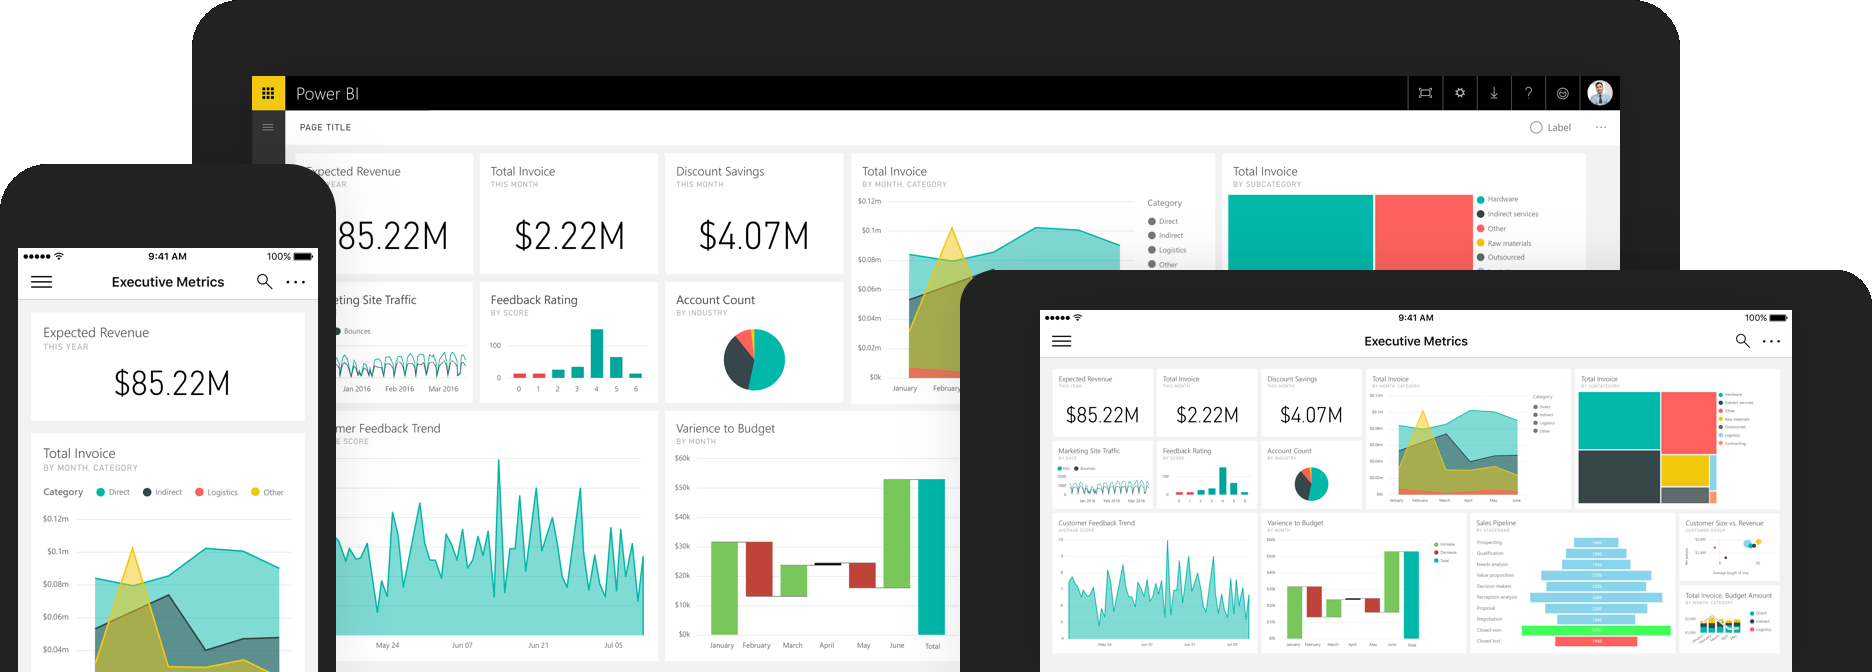 Power BI running on a phone and a tablet